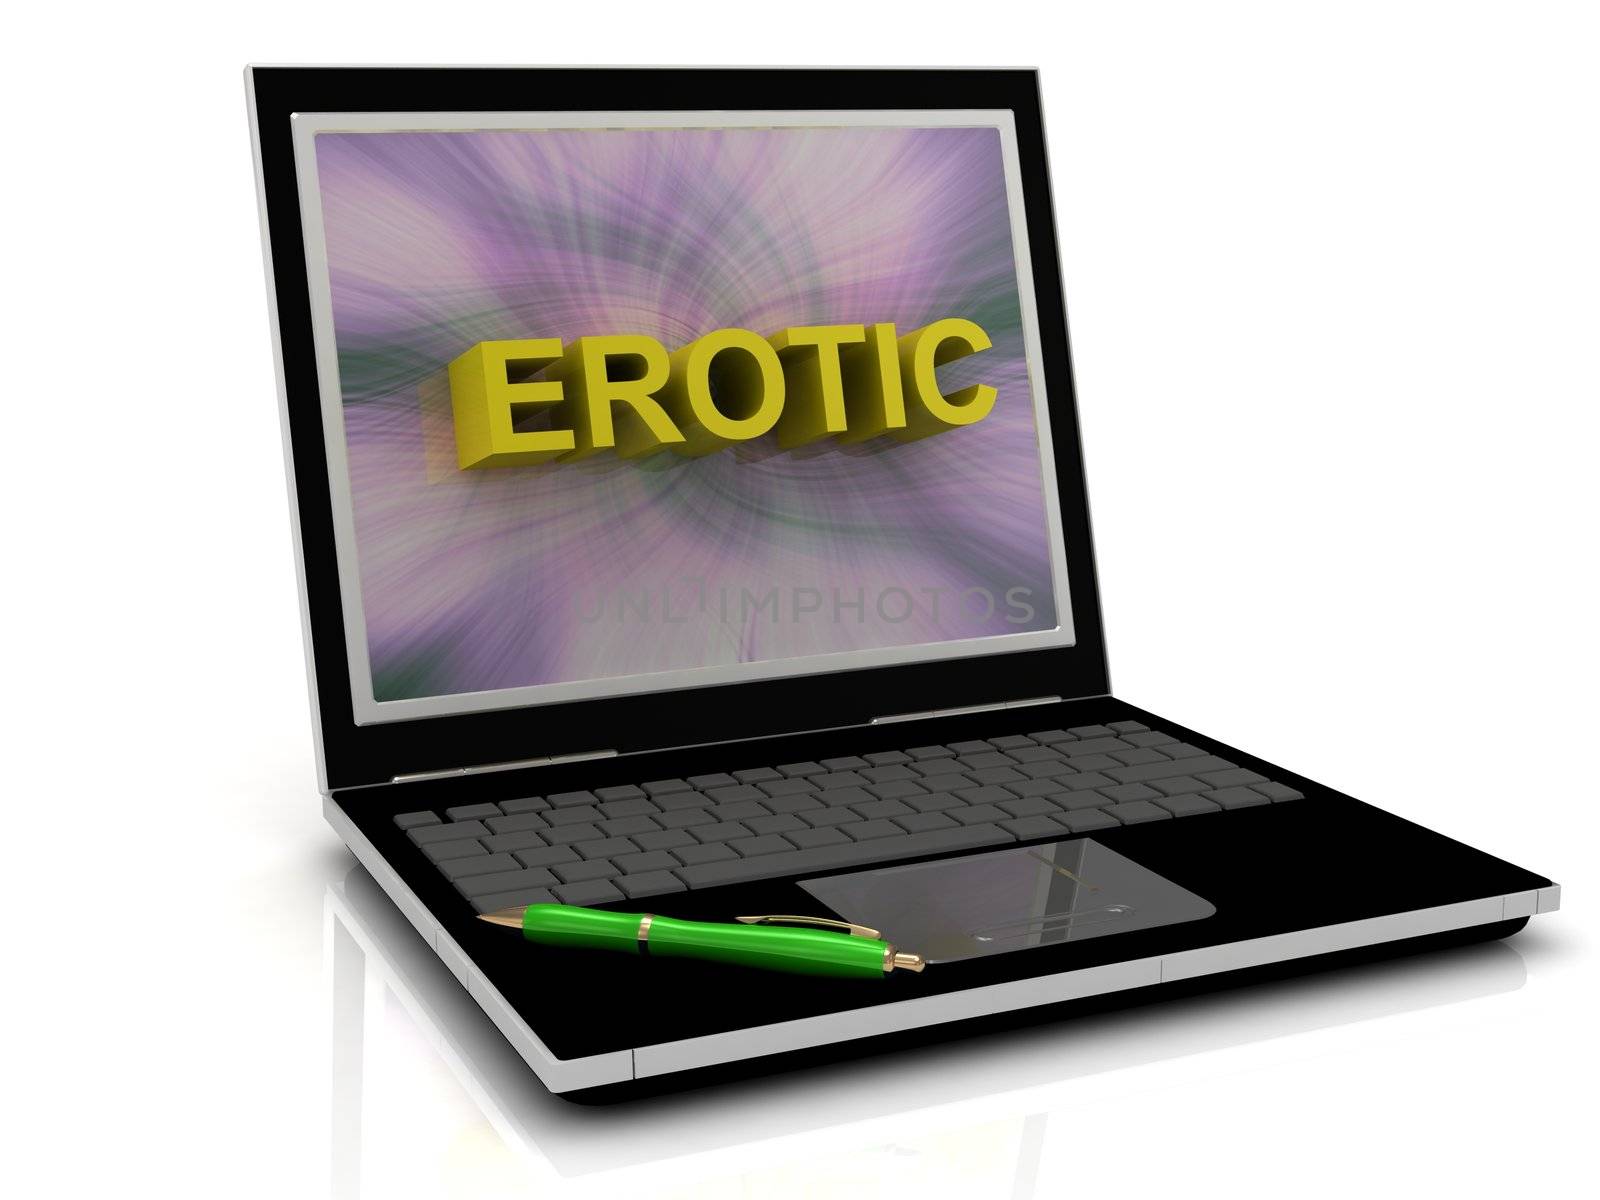 EROTIC message on laptop screen in big letters. 3D illustration isolated on white background